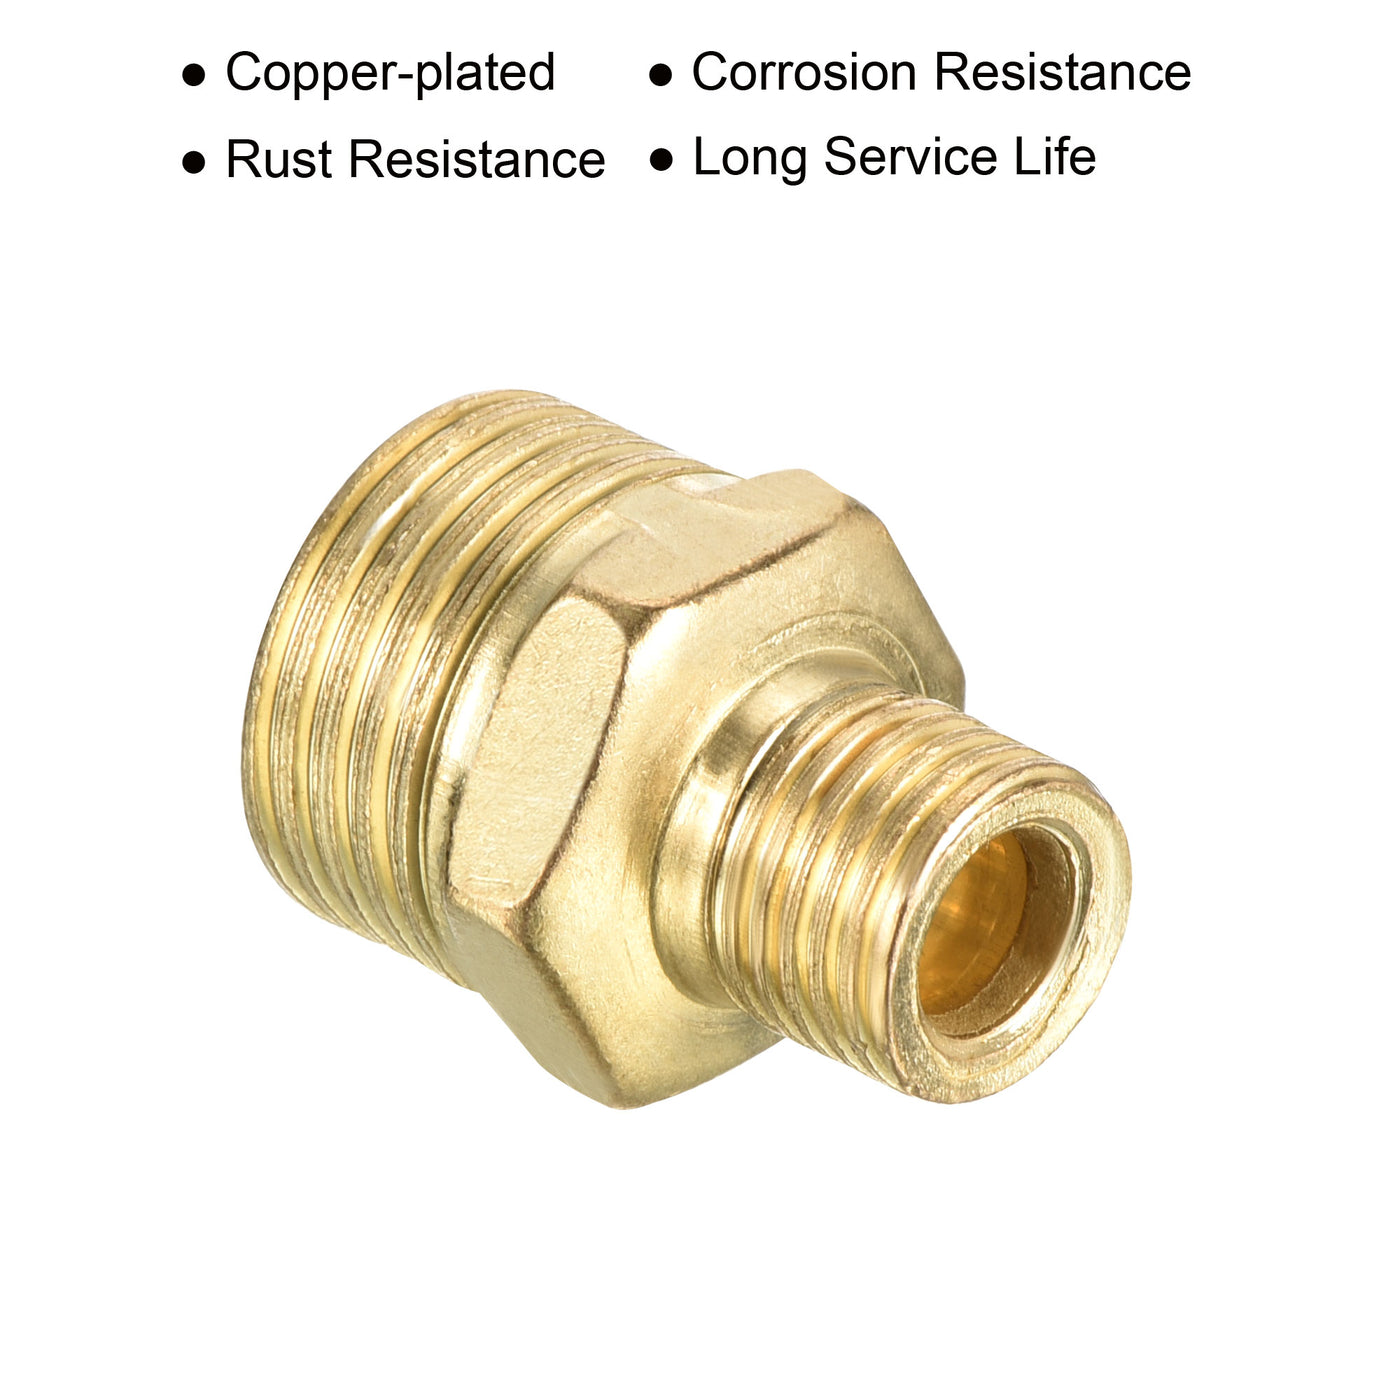 Harfington Pipe Fitting, 2 Pack 1/2PT to 1/4PT Male Thread Hex Extension Reducing Connector Adapter for Garden Water Pipes, Gold